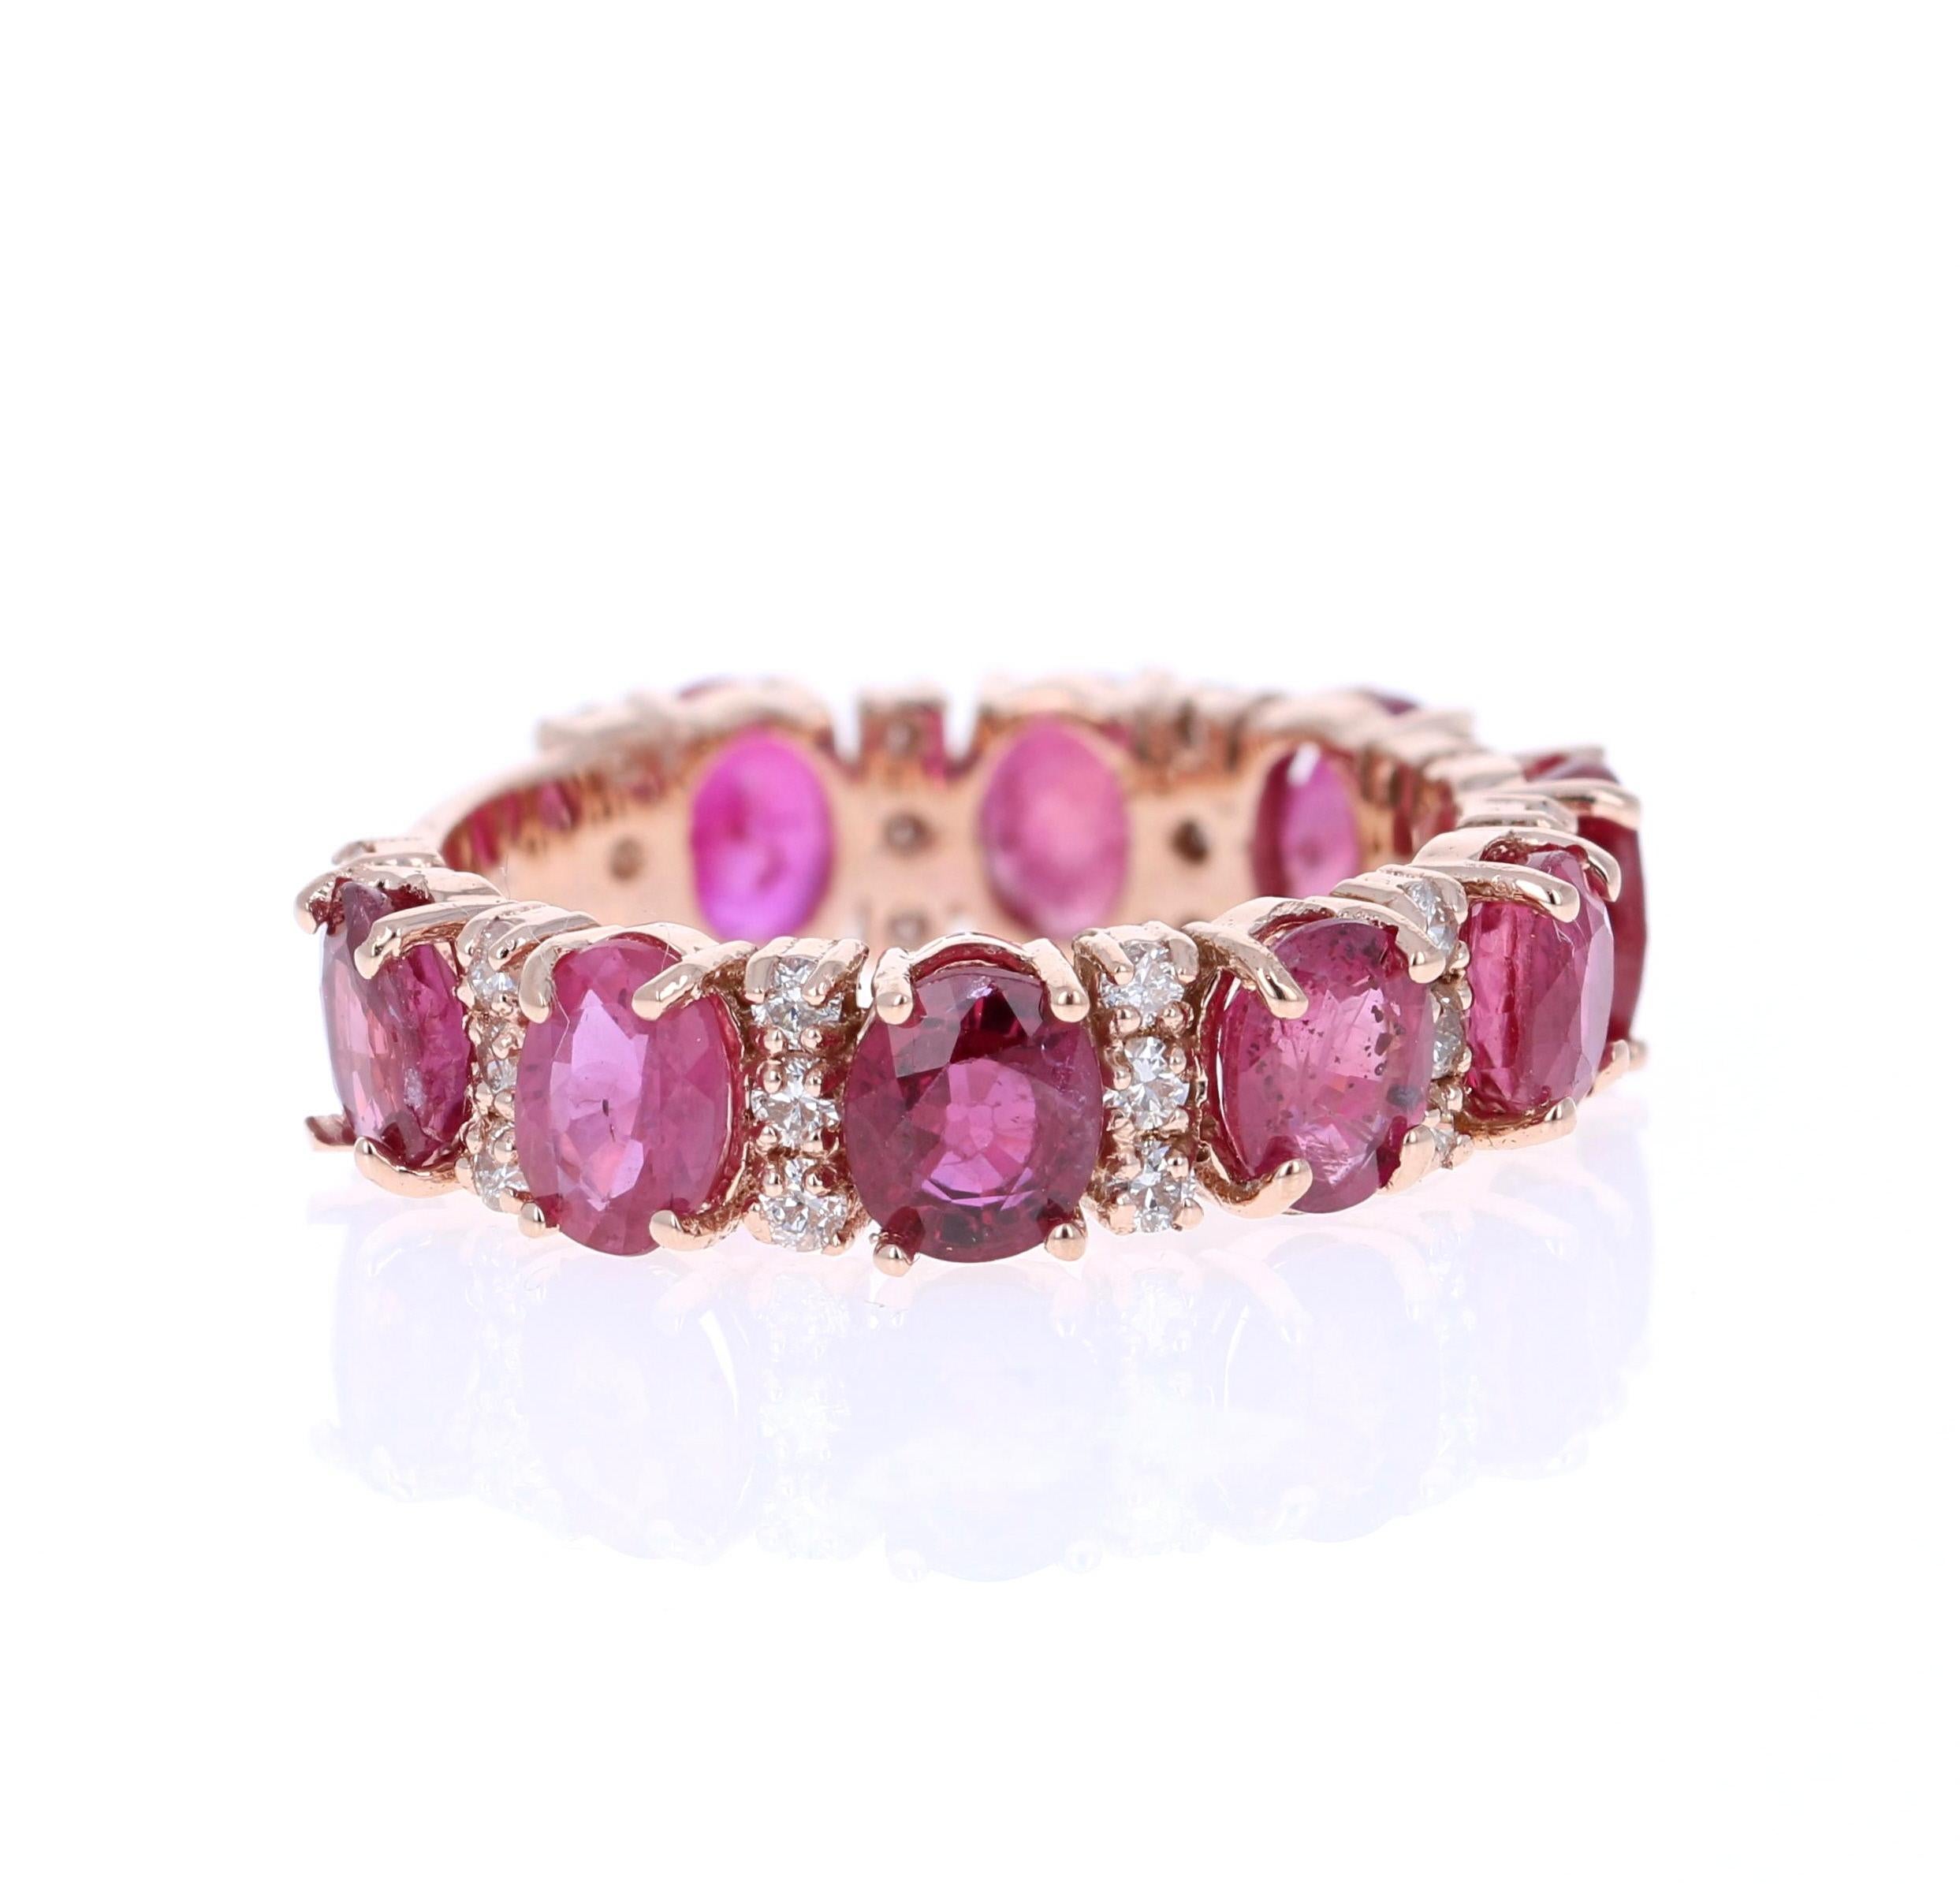 This unique band has 9 Oval Cut Ruby that weighs 4.95 Carats and 30 Round Cut Diamonds that weigh 0.47 Carats. The Total Carat Weight of the Band is 5.42 Carats. The diamonds have a clarity of VS and color of H. 
The rubies are natural and have